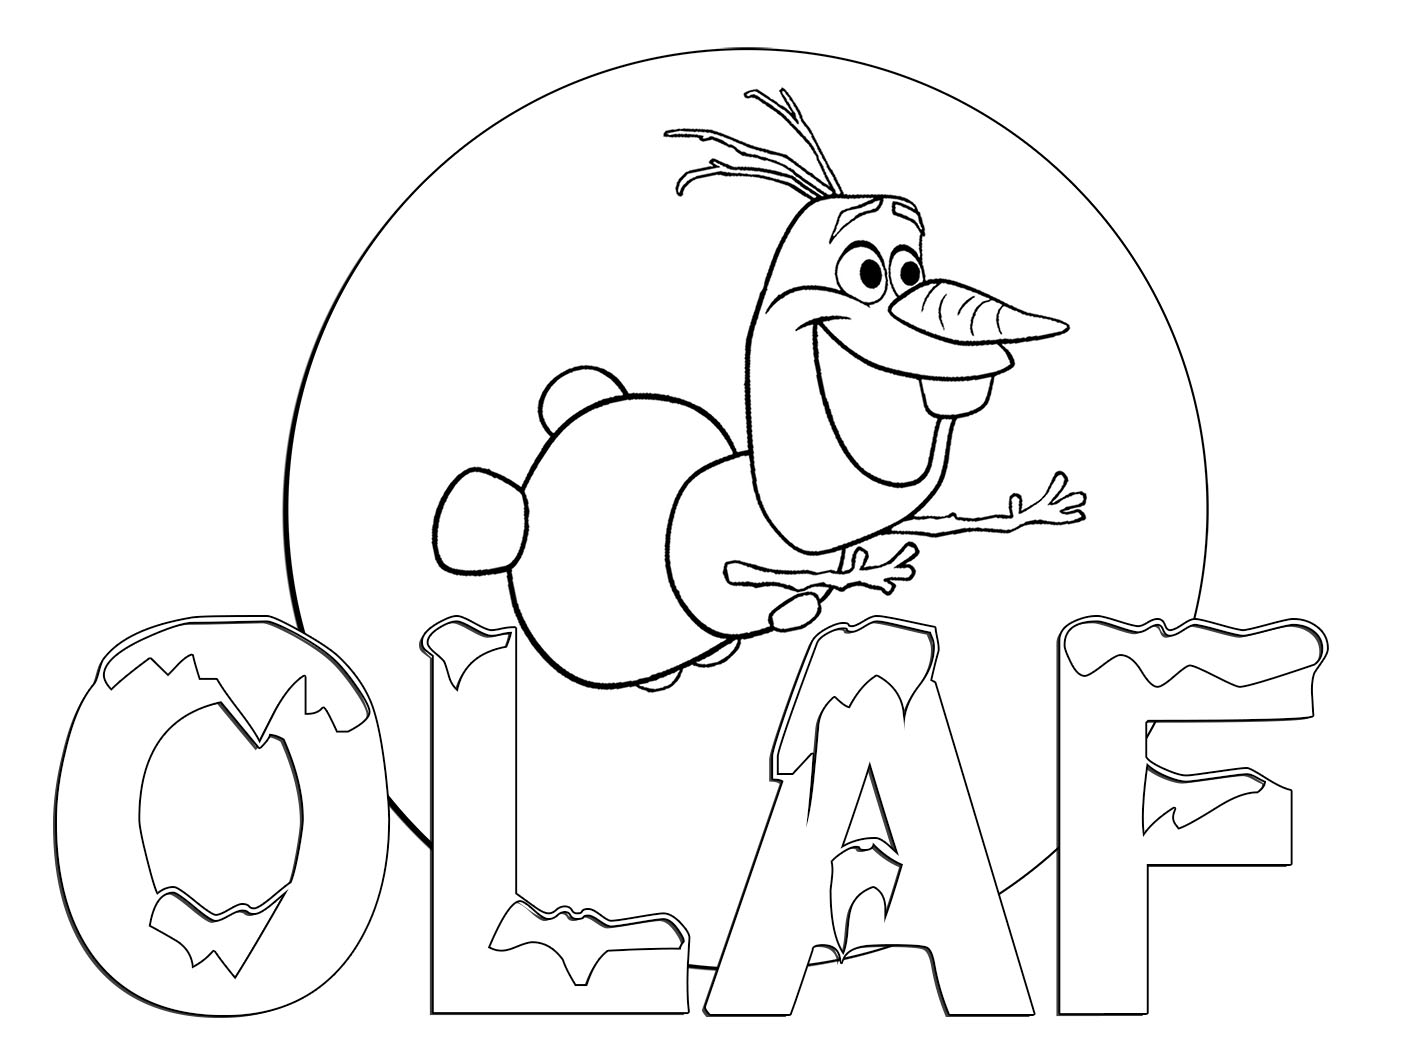 Frozen Coloring-Pages | Color pages | FREE coloring pages for kids |Printable coloring pages for kids| #34